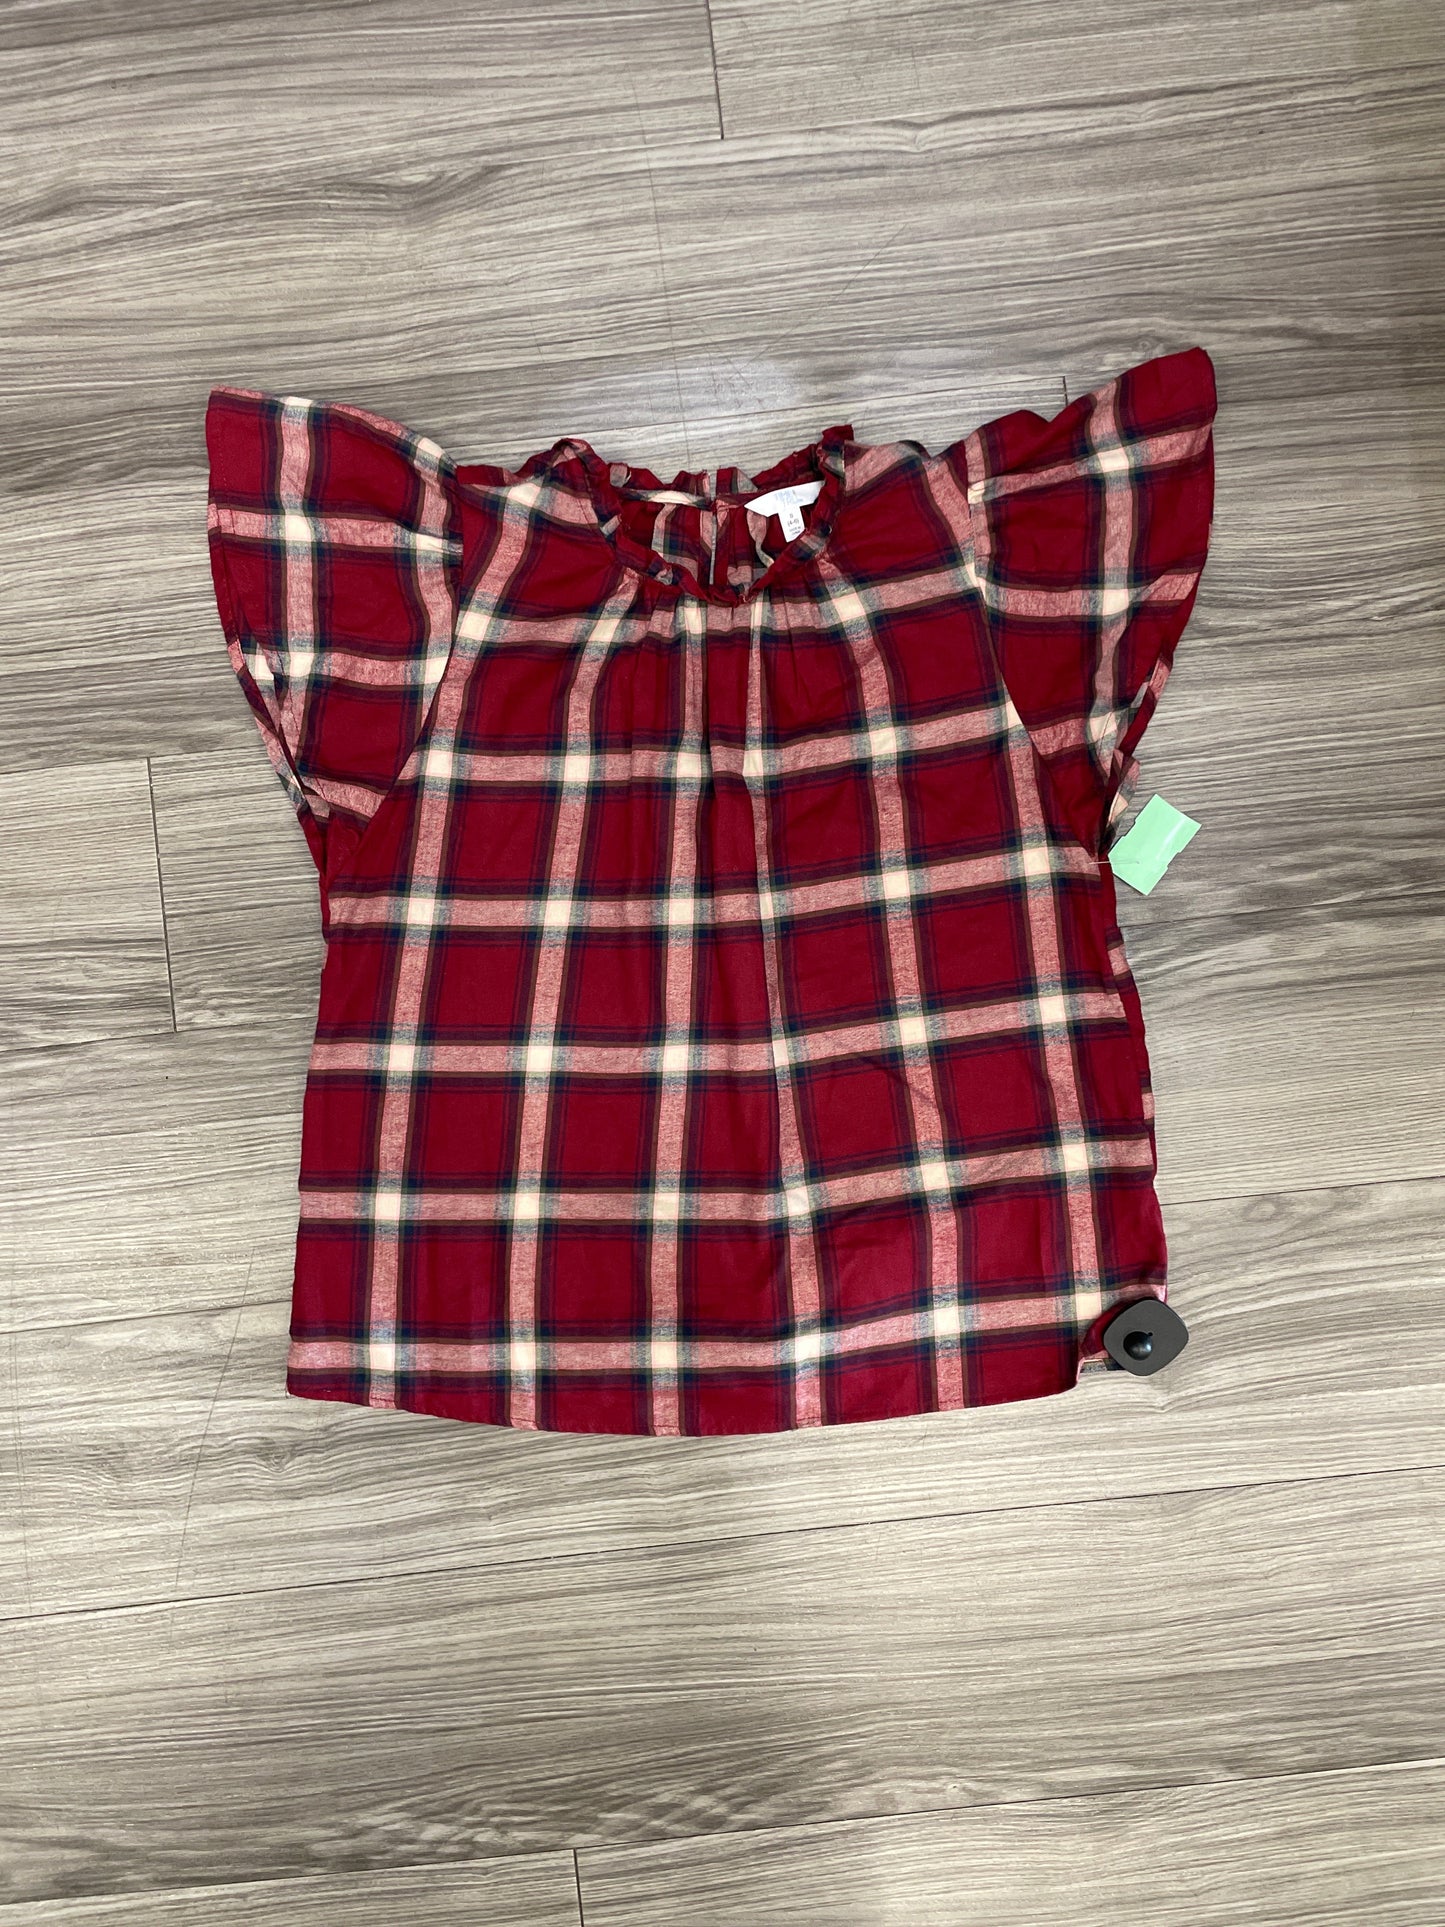 Plaid Pattern Top Short Sleeve Time And Tru, Size S